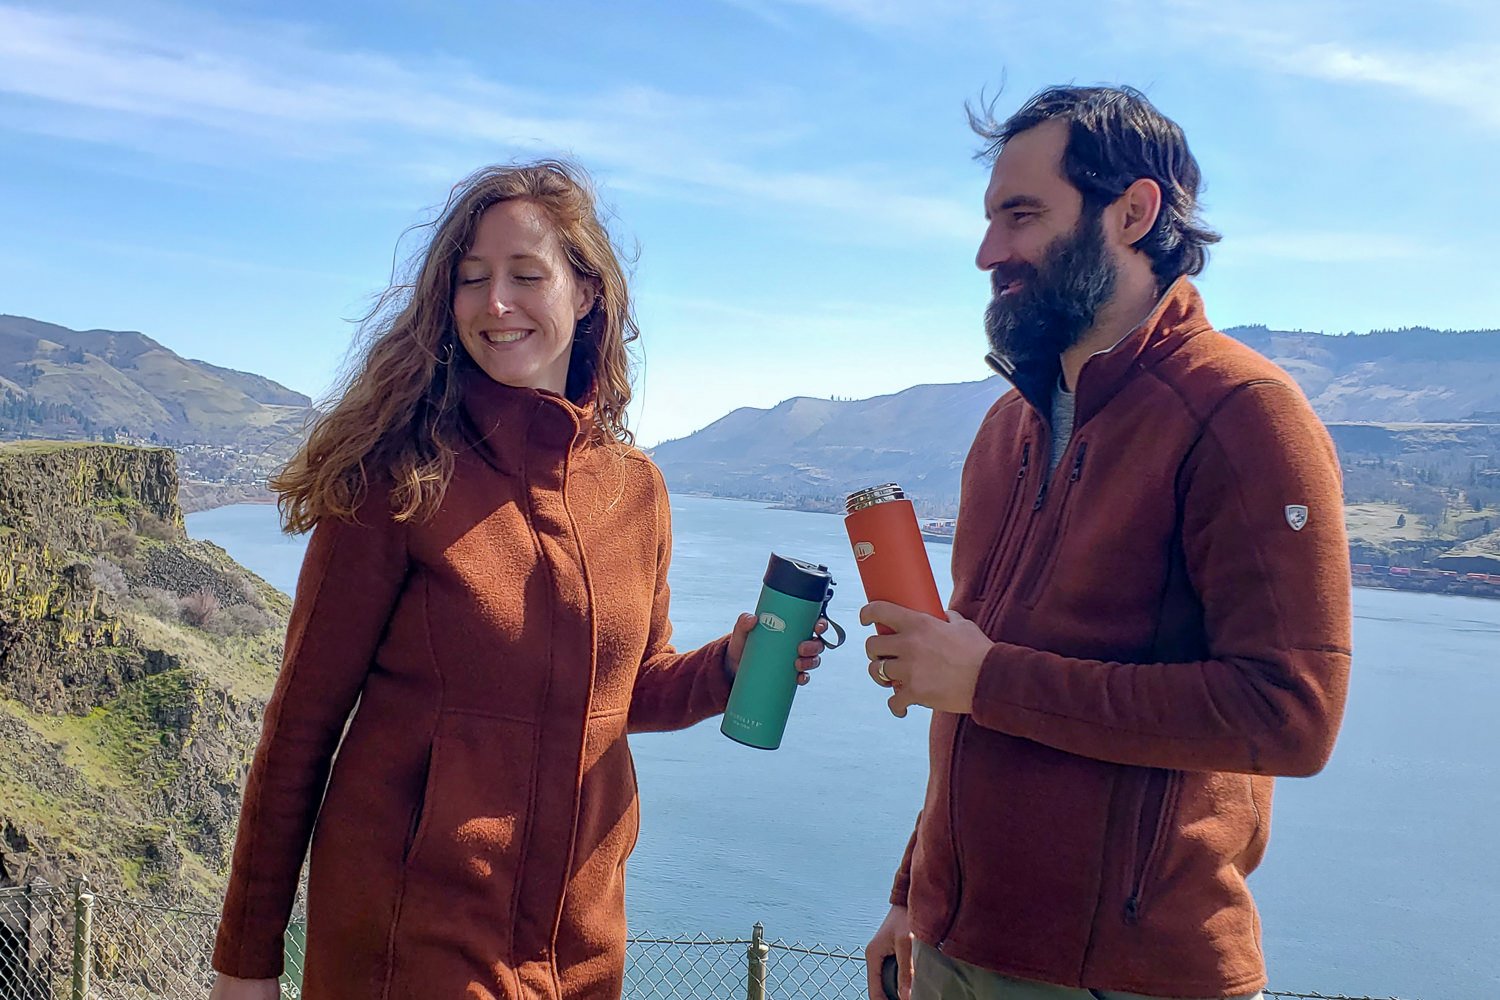 Two people standing in front of a river gorge view holding GSI Microlite bottles